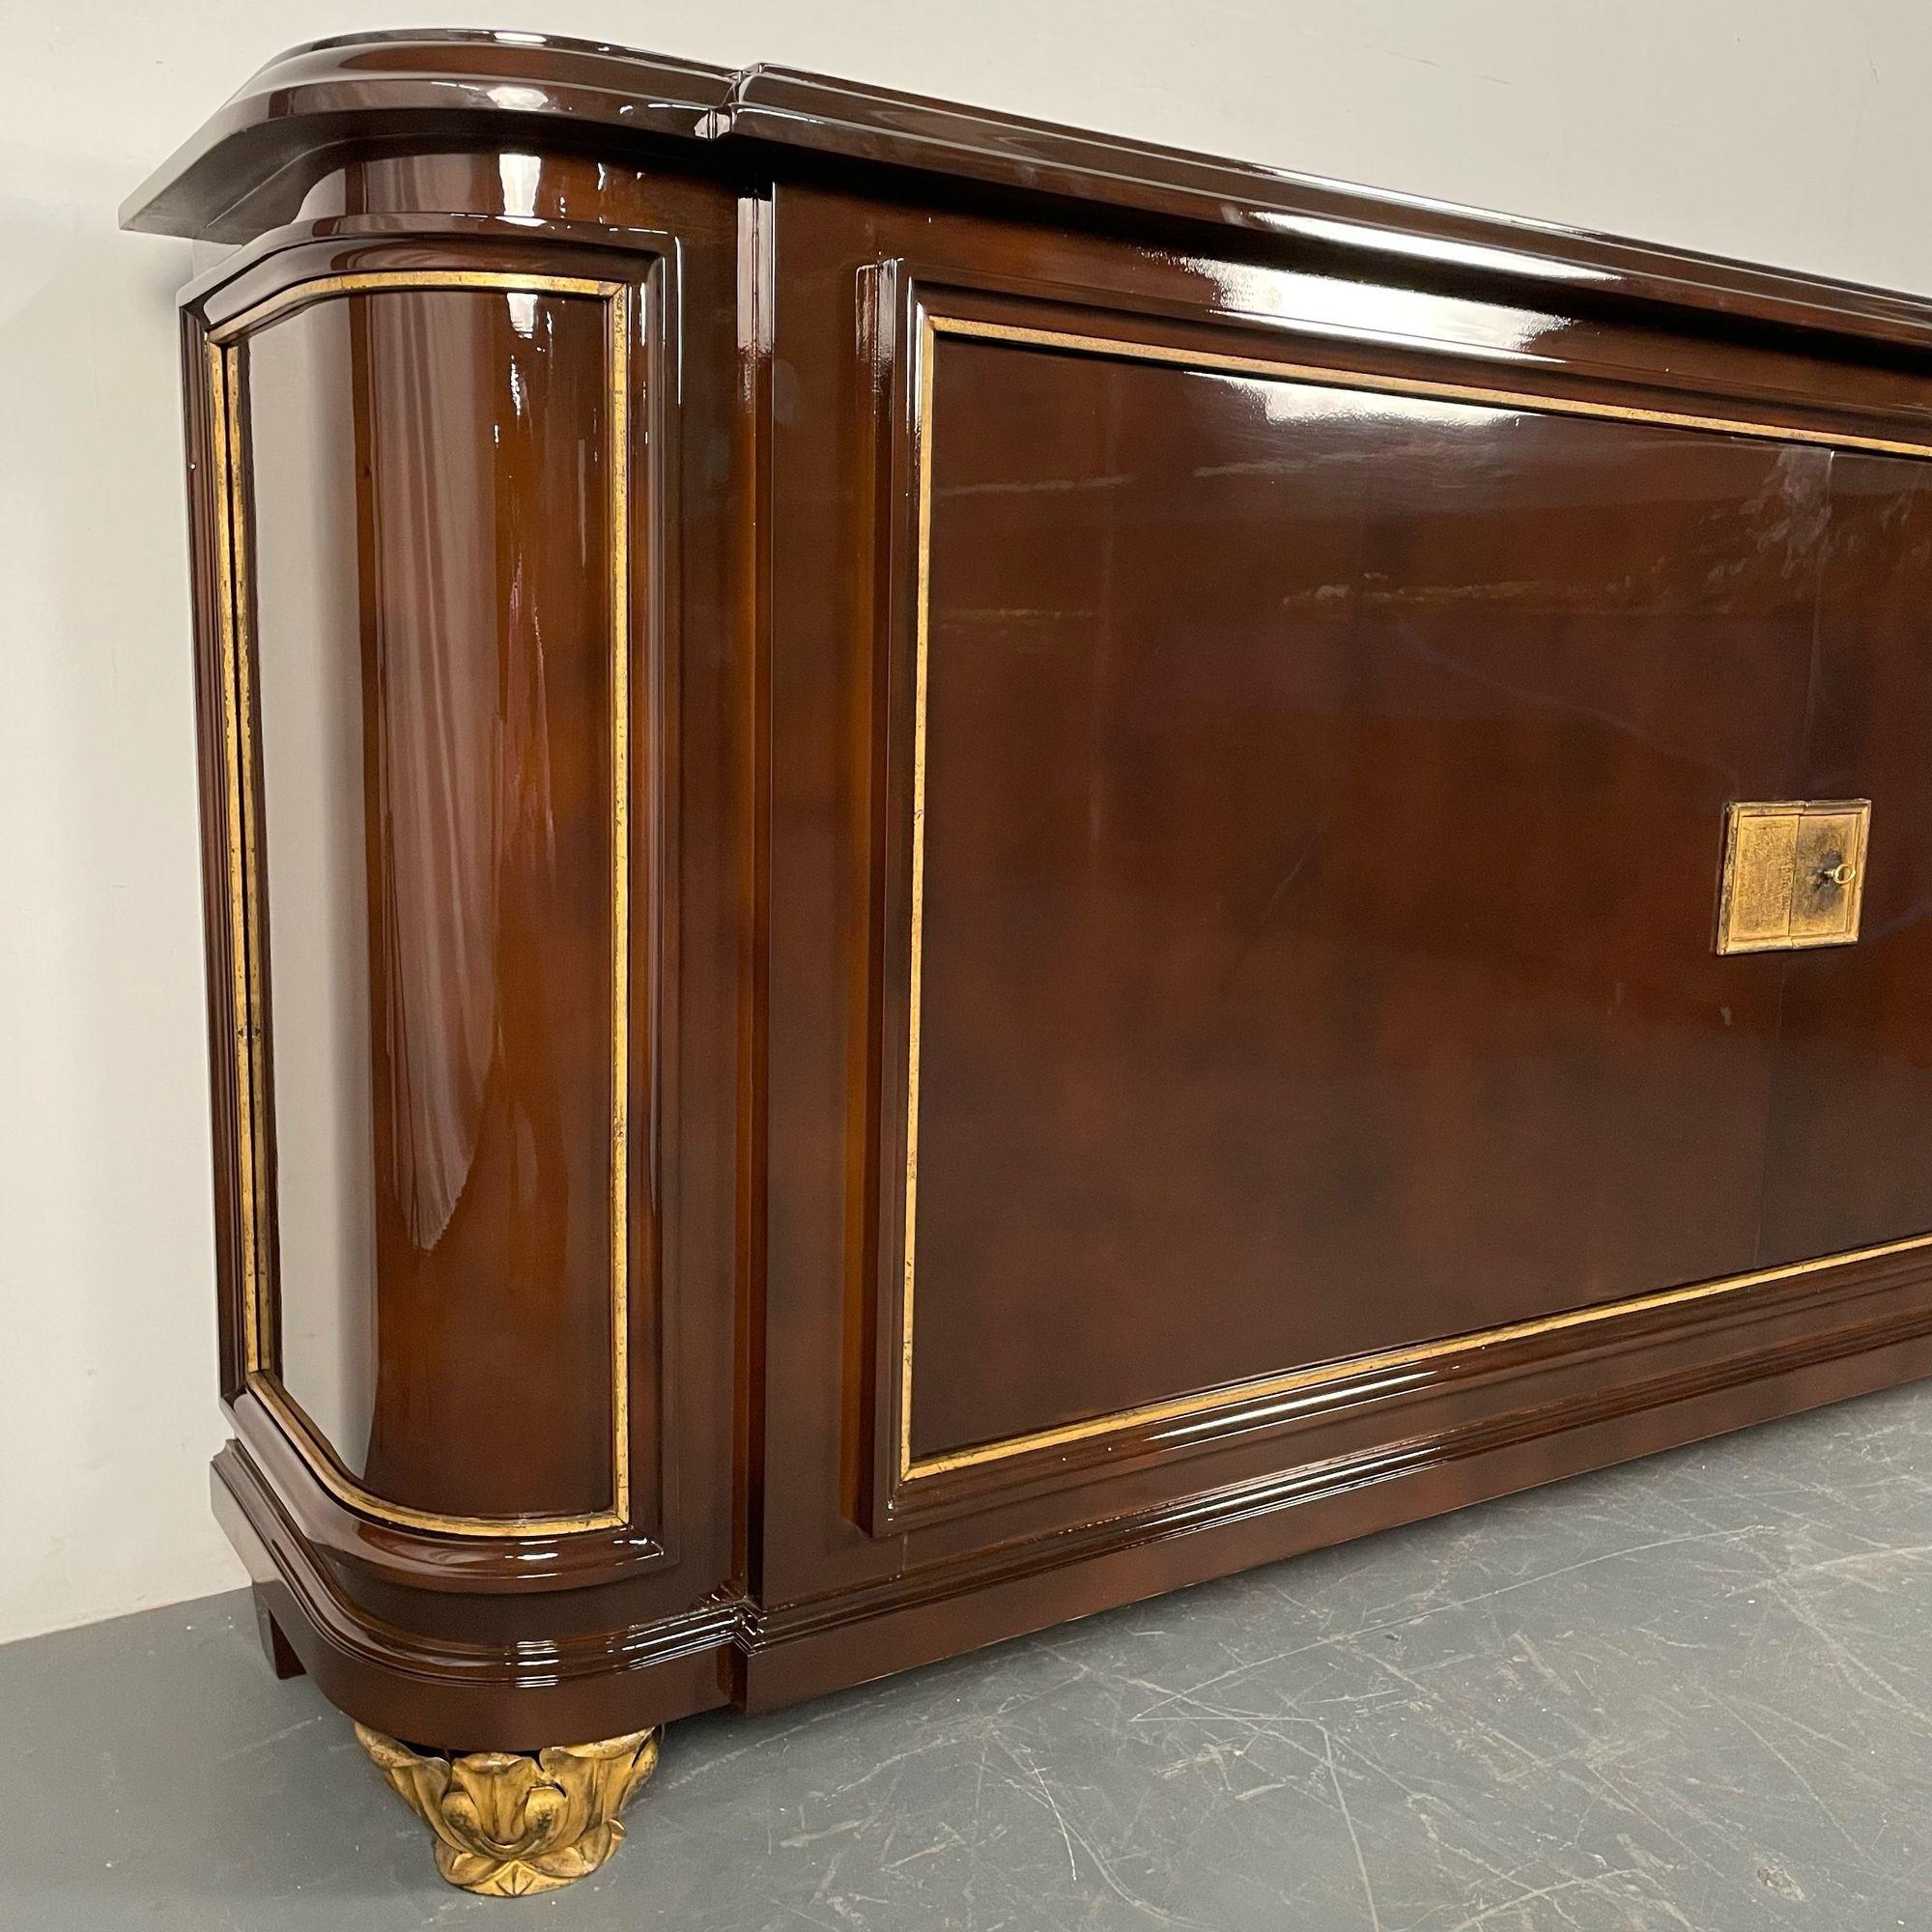 Rene Drouet, French Art Deco, Sideboard, Brown Lacquer, Gilt, France, 1940s For Sale 14